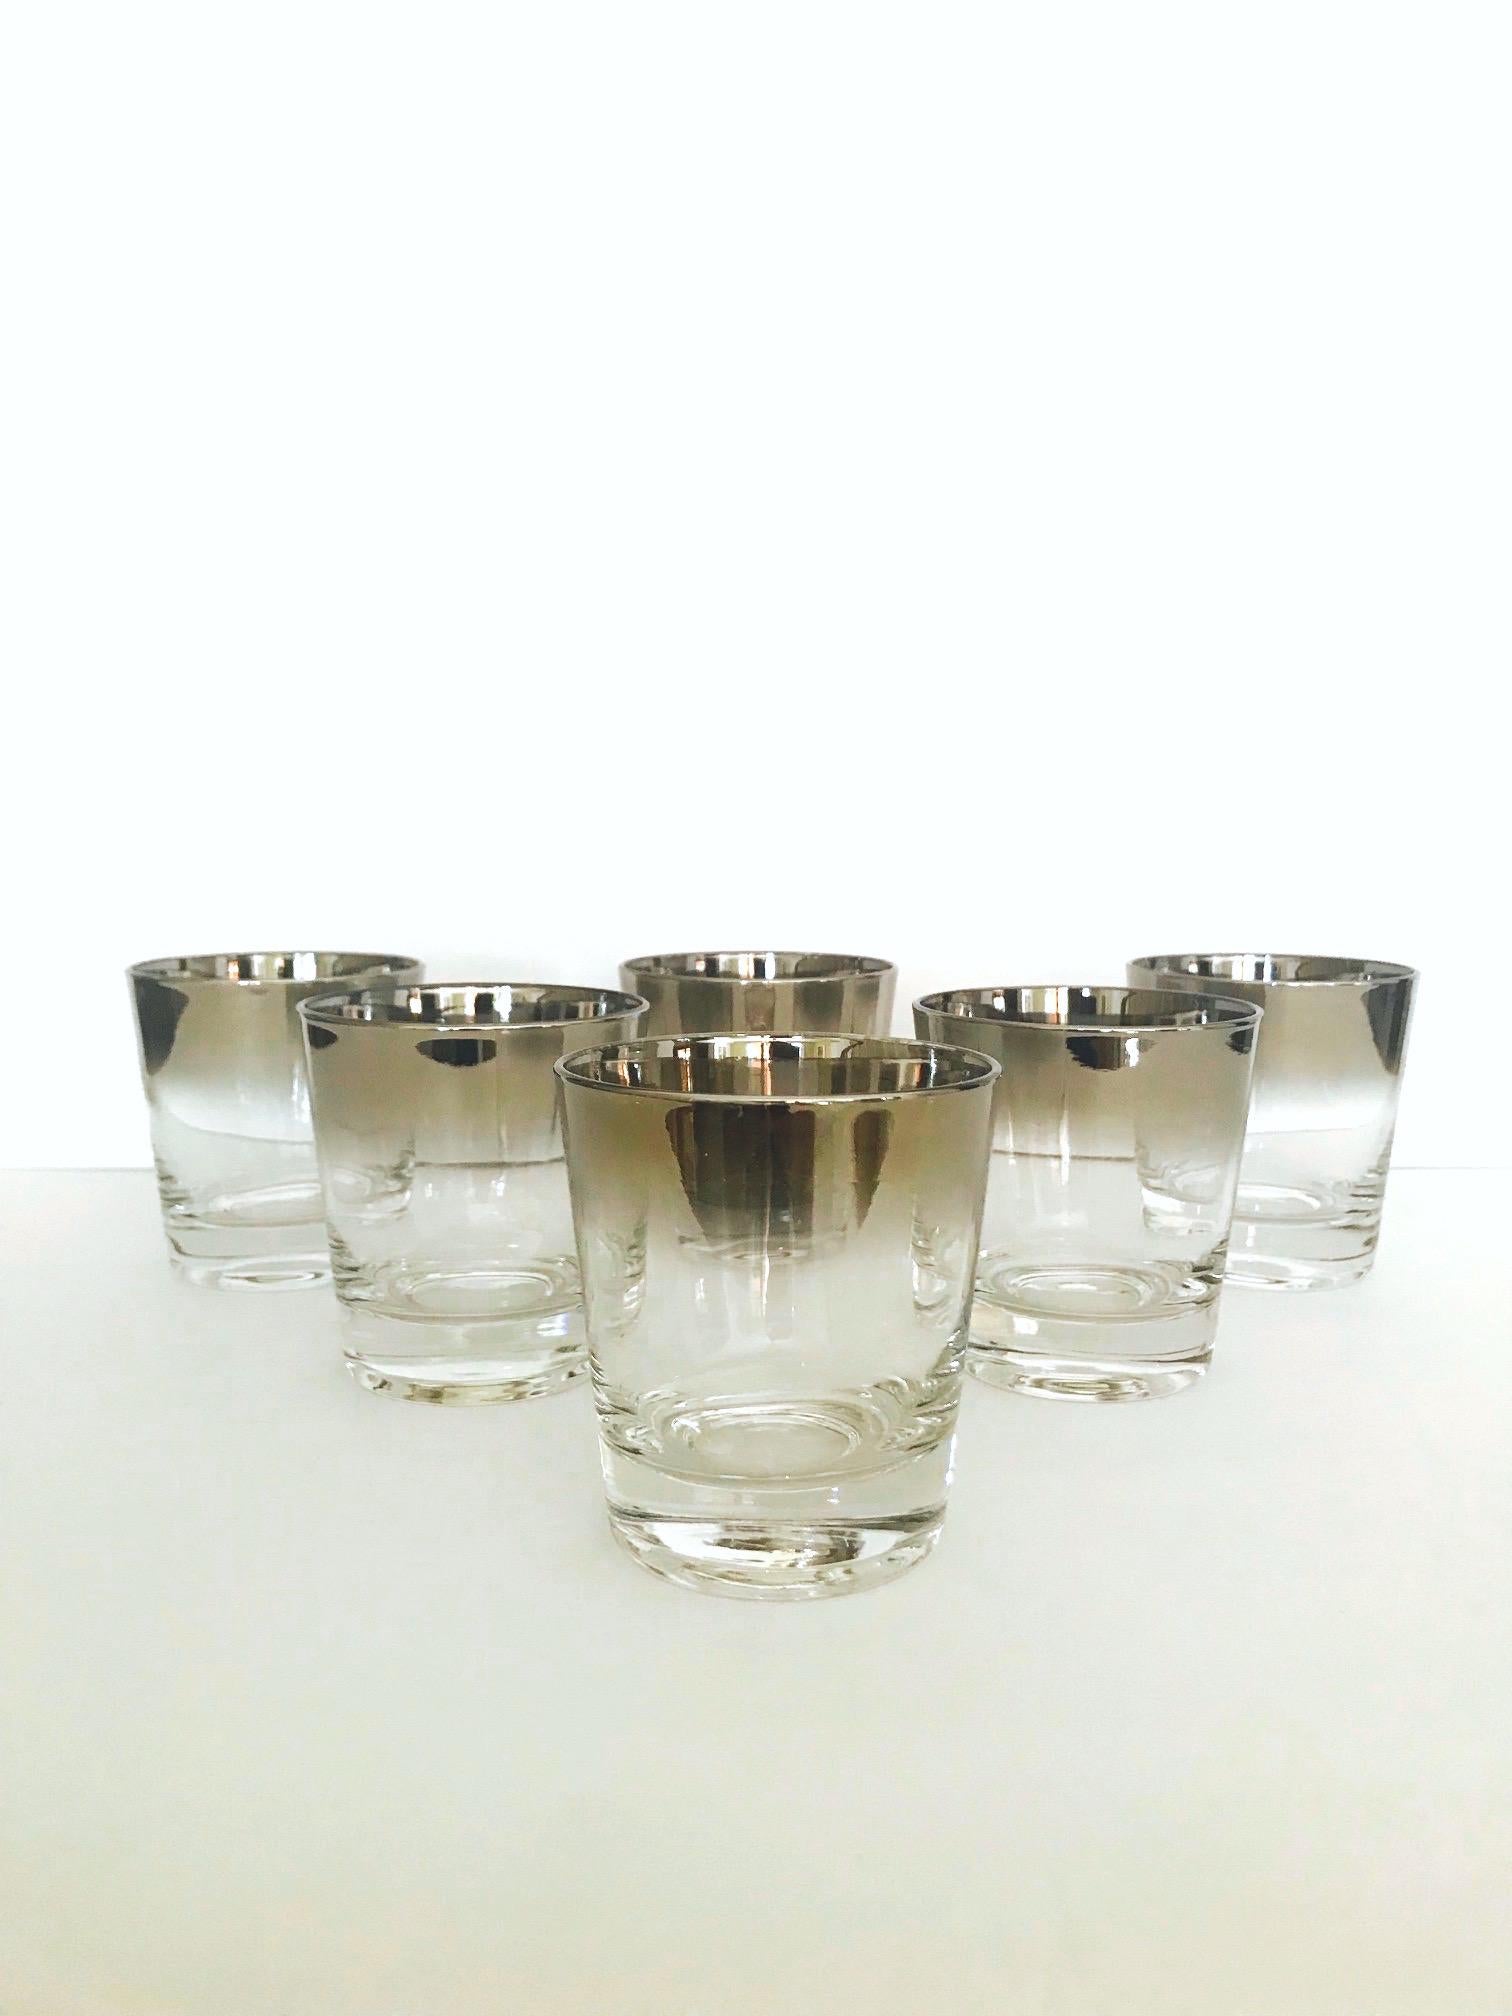 Iconic Mid-Century Modern barware set with silver fade overlay design. Great looking rock glasses with tapered forms and gradient hues of gunmetal along the rims. Set conveniently includes an extra glass for an actual set of 7.
 
  